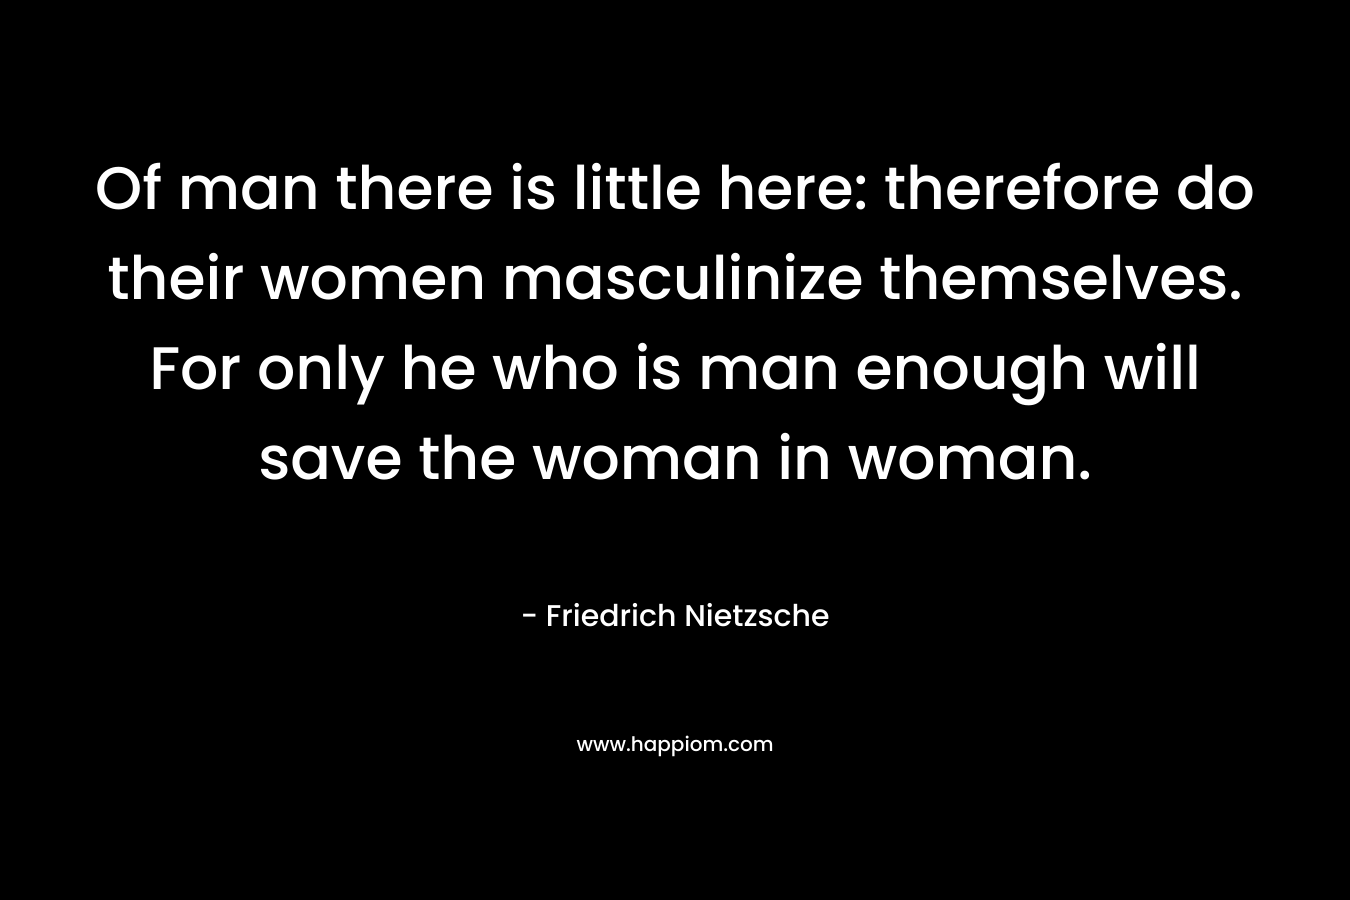 Of man there is little here: therefore do their women masculinize themselves. For only he who is man enough will save the woman in woman.